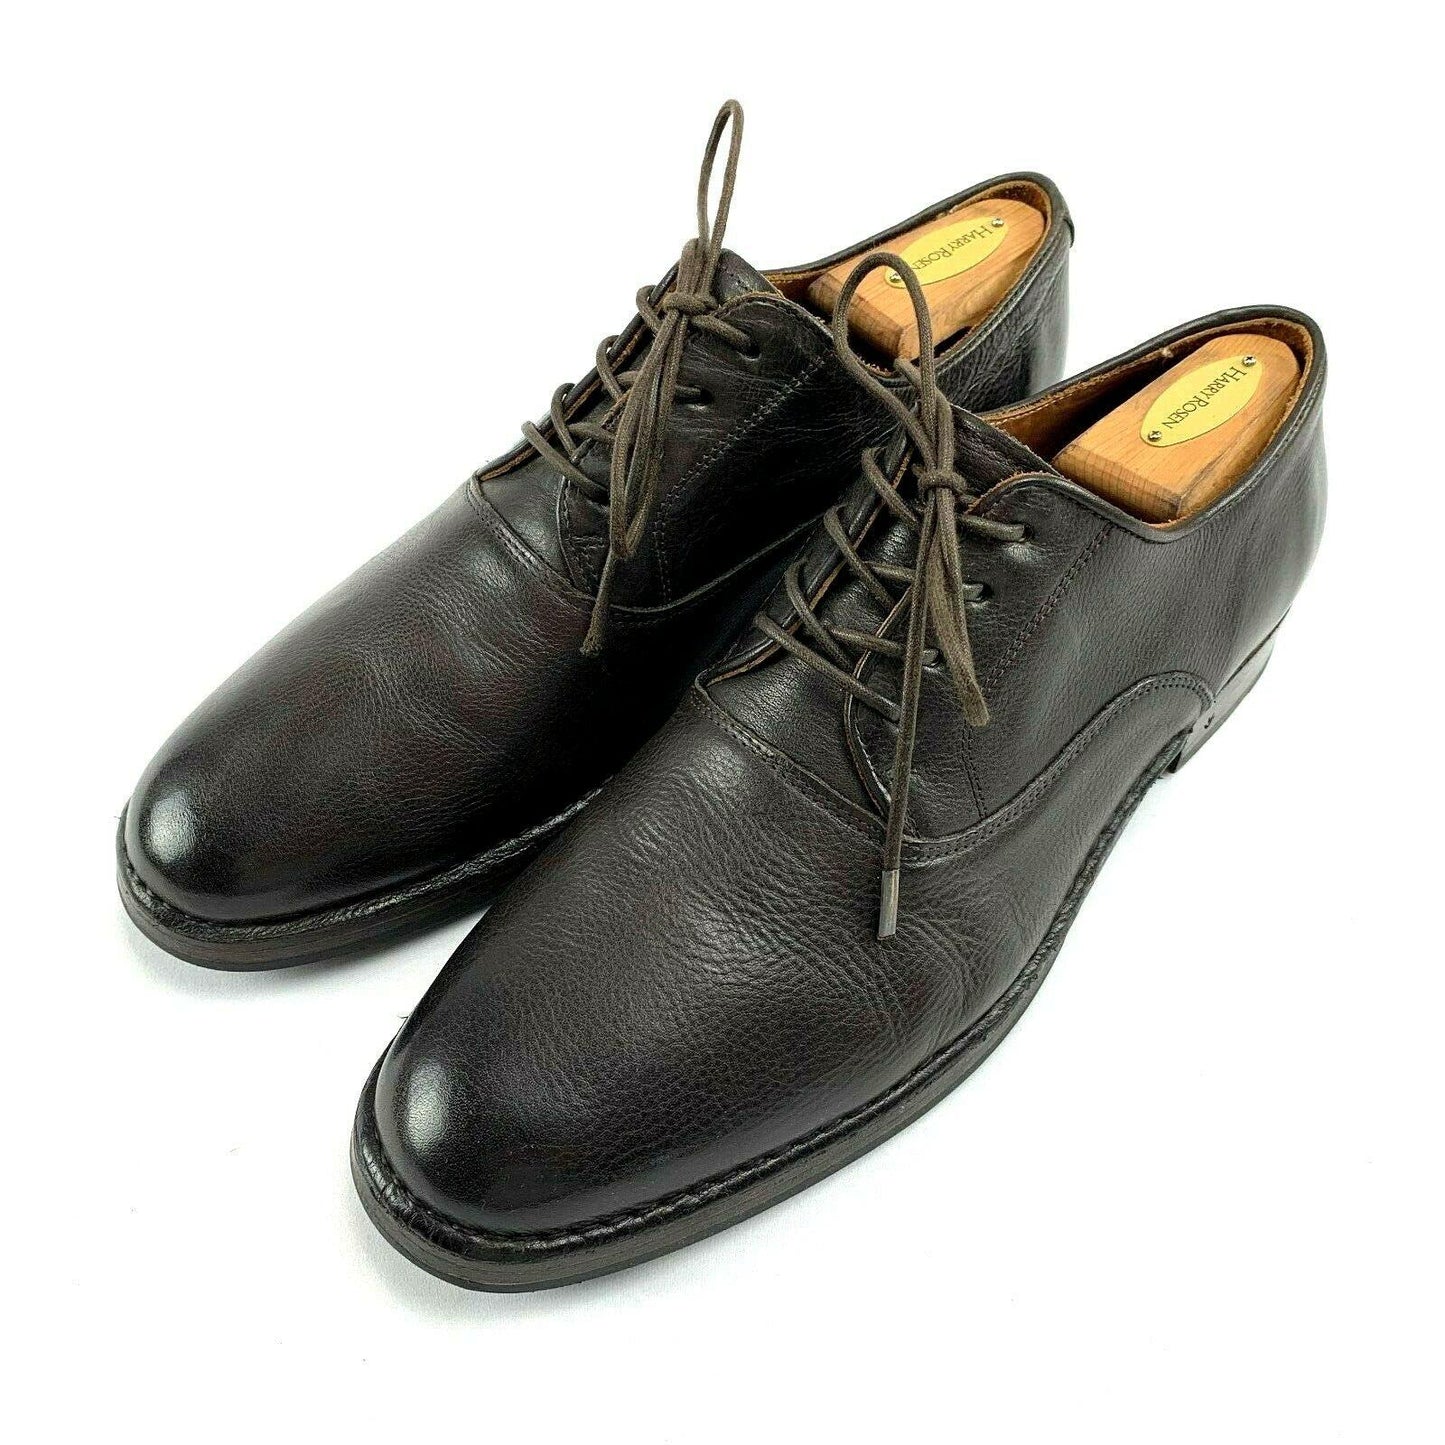 John Varvatos Collection Brown Leather Derby Dress Shoes 9.5D—Genuine Design luxury consignment